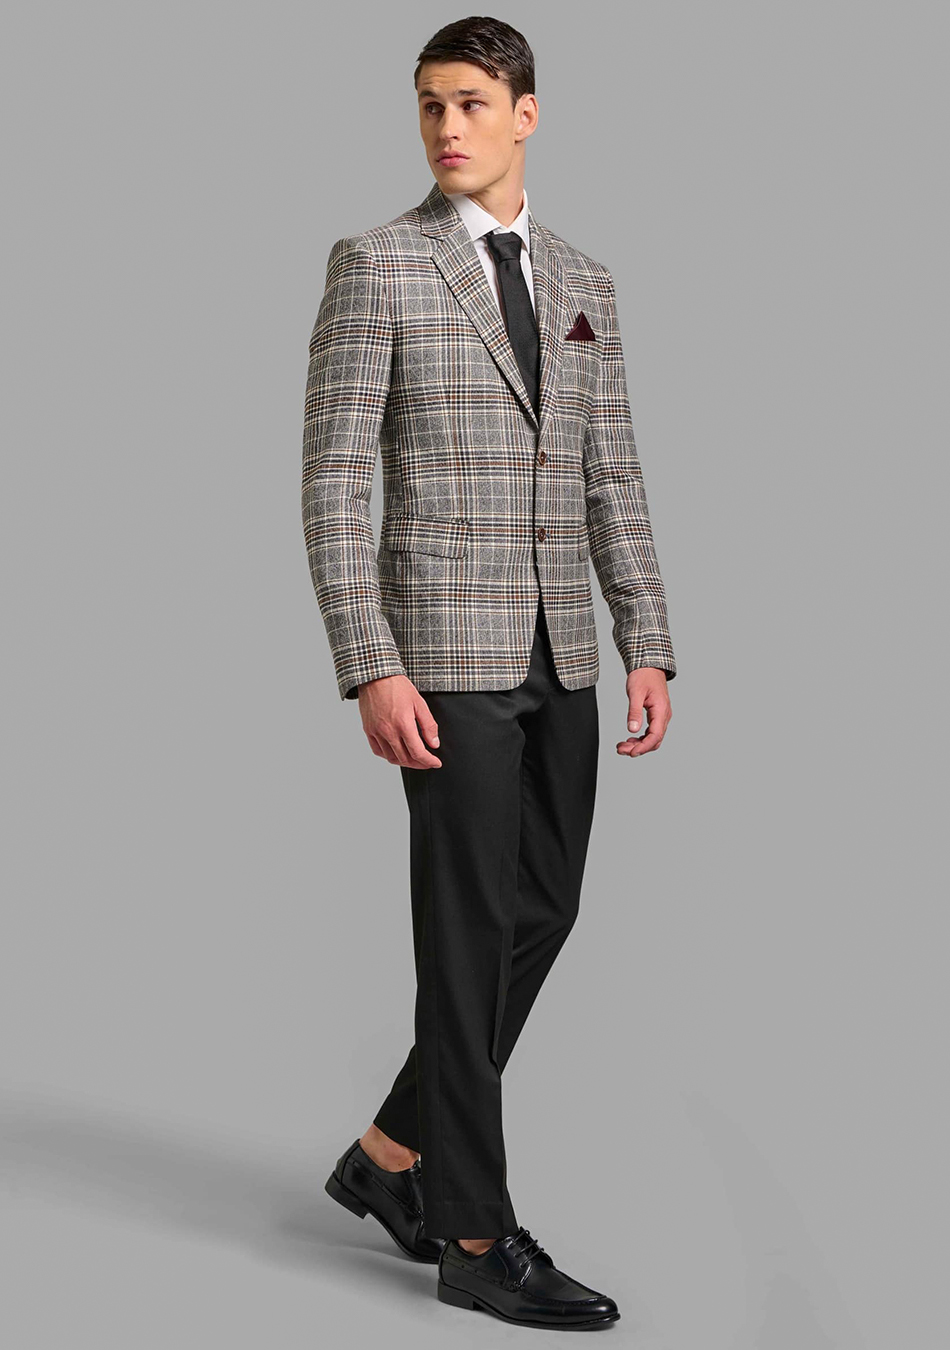 Grey blazer paired with red pants is a classic style combination. | Suit  shirts, Latest mens fashion trends, Red pants